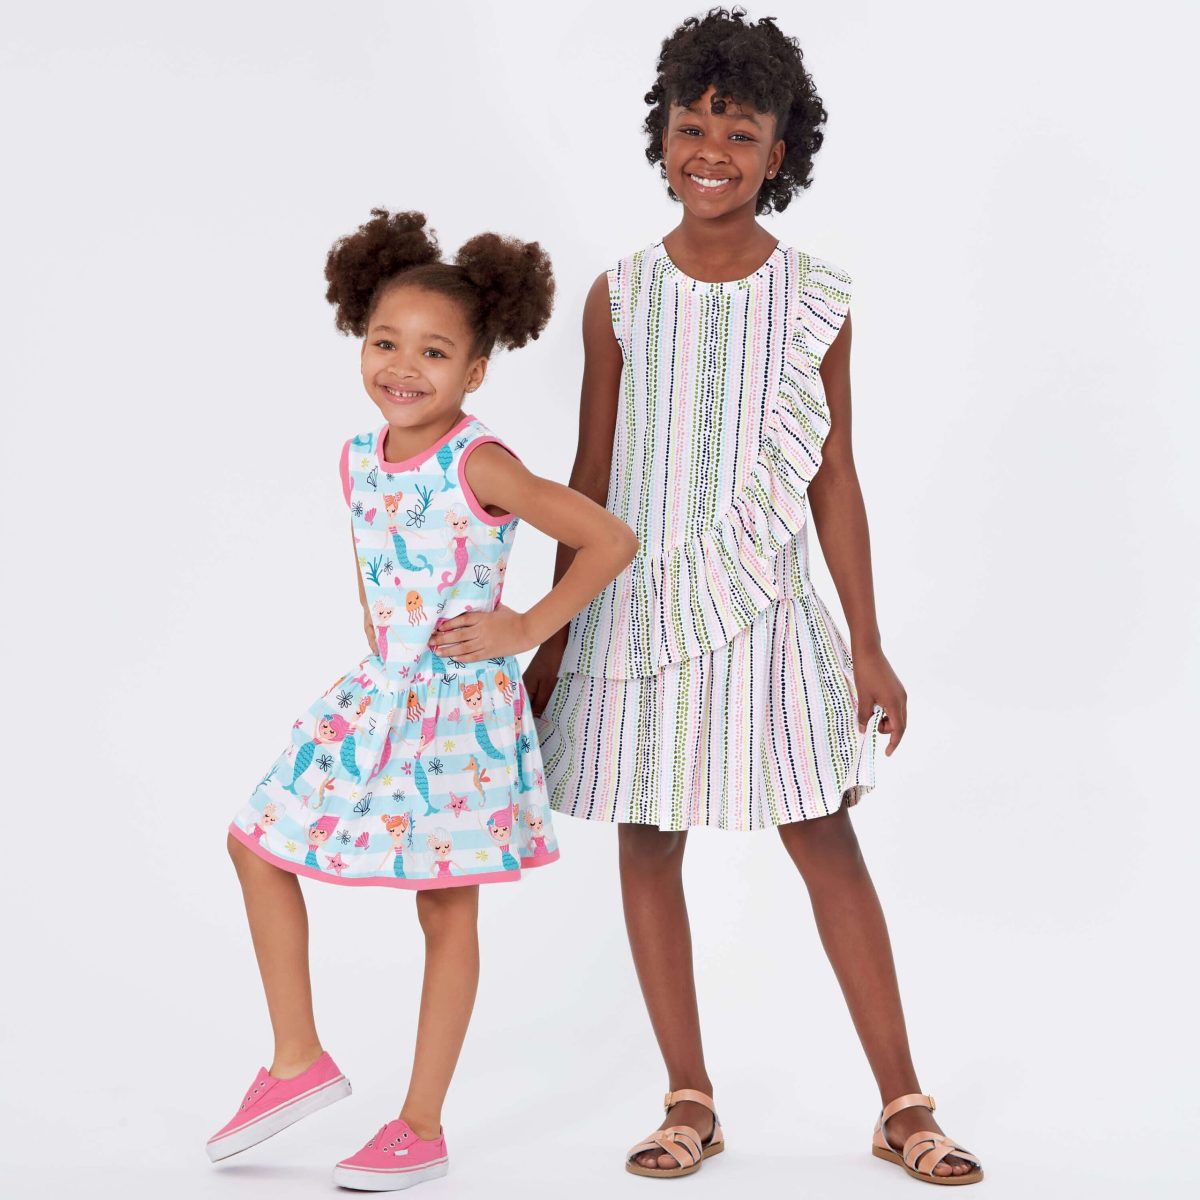 New Look Sewing Pattern N6630 Children's And Girls' Dresses